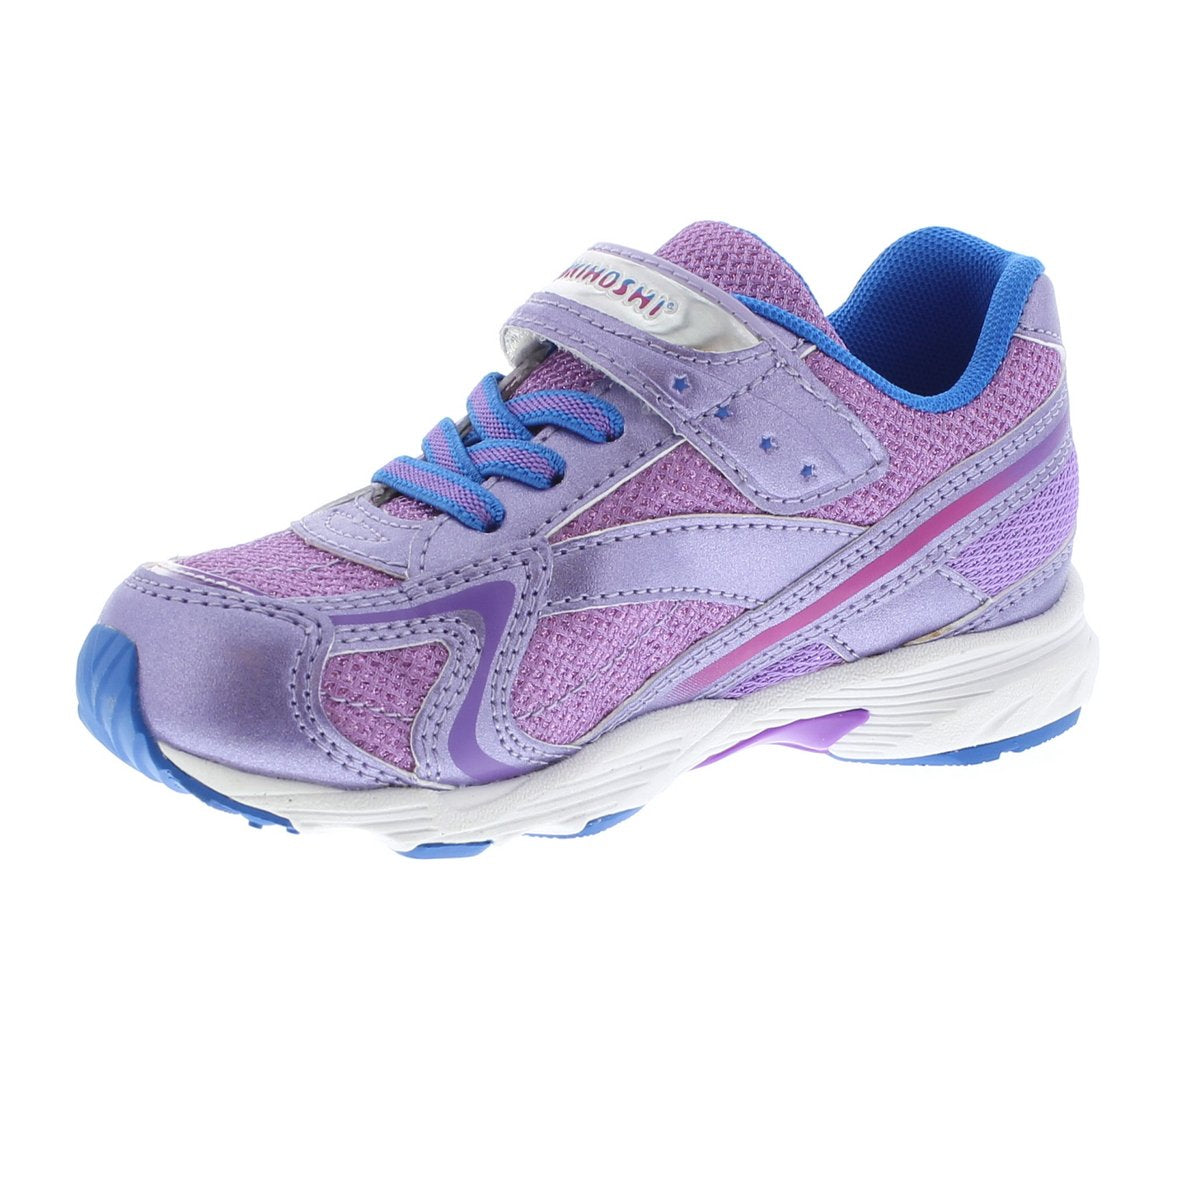 Child Tsukihoshi Glitz Sneaker in Purple/Royal from the front view